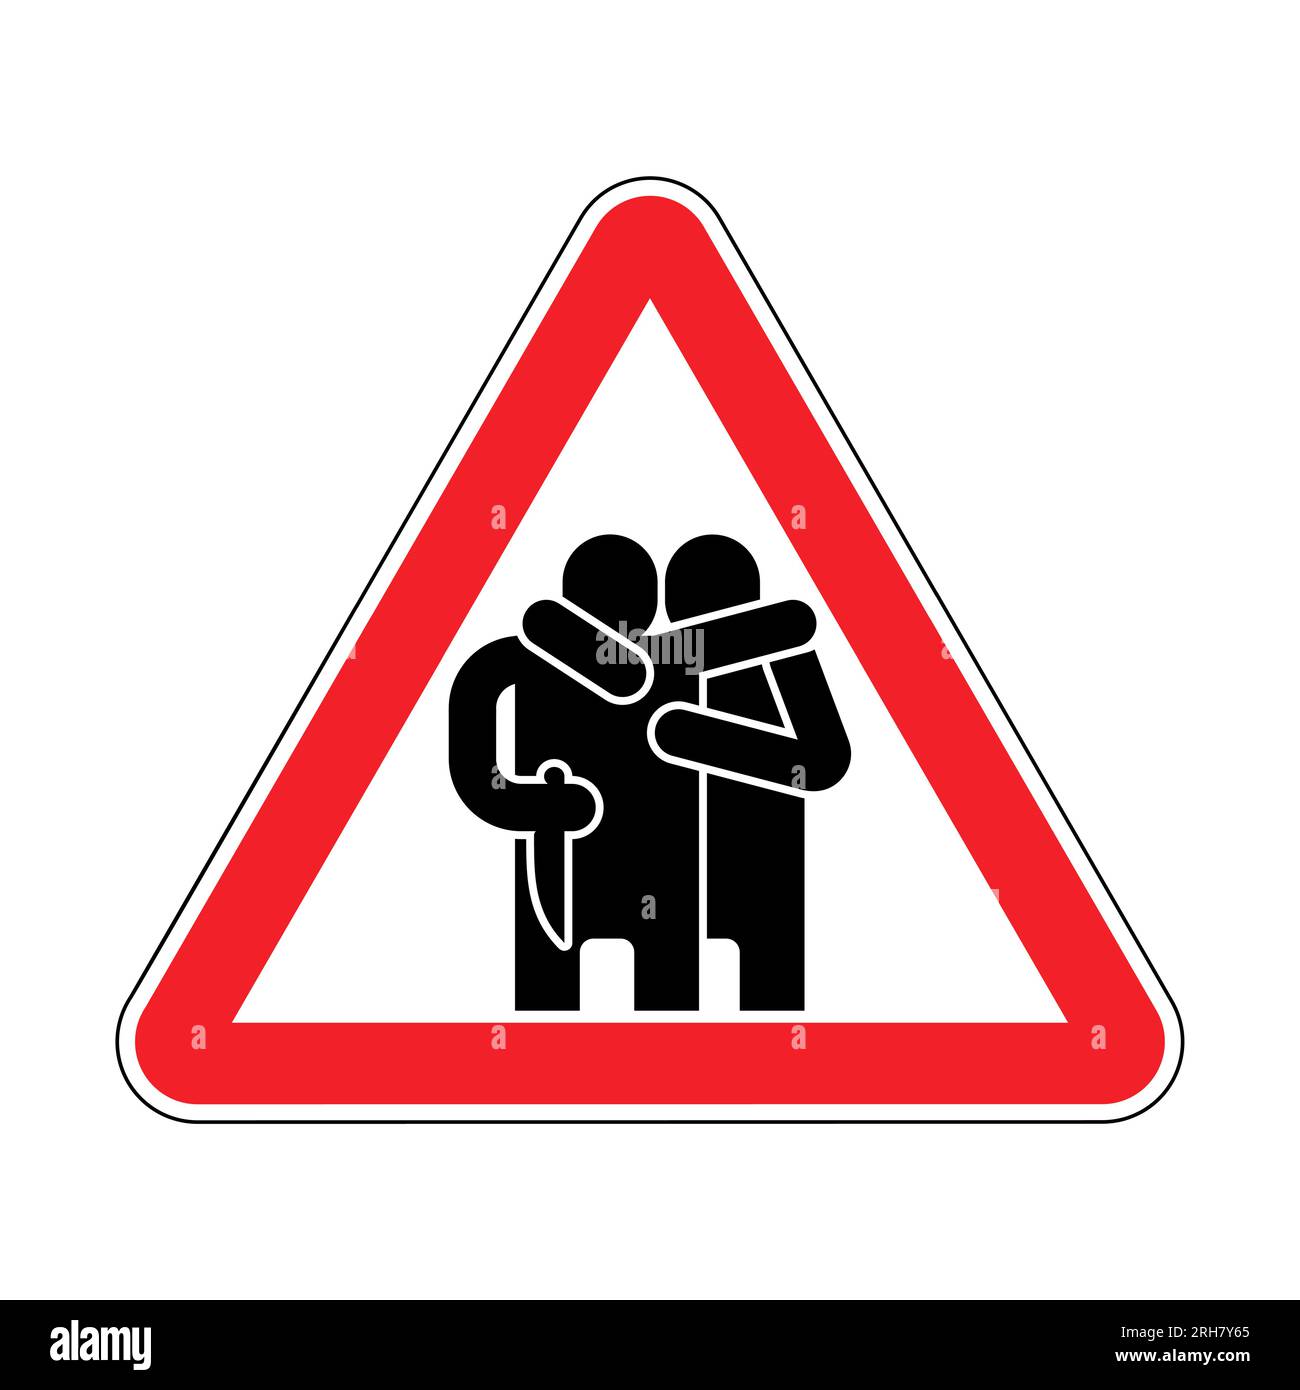 Attention traitor. Caution of betrayal. Red triangular road sign. Concept of betrayal is a knife in the back. Stock Vector